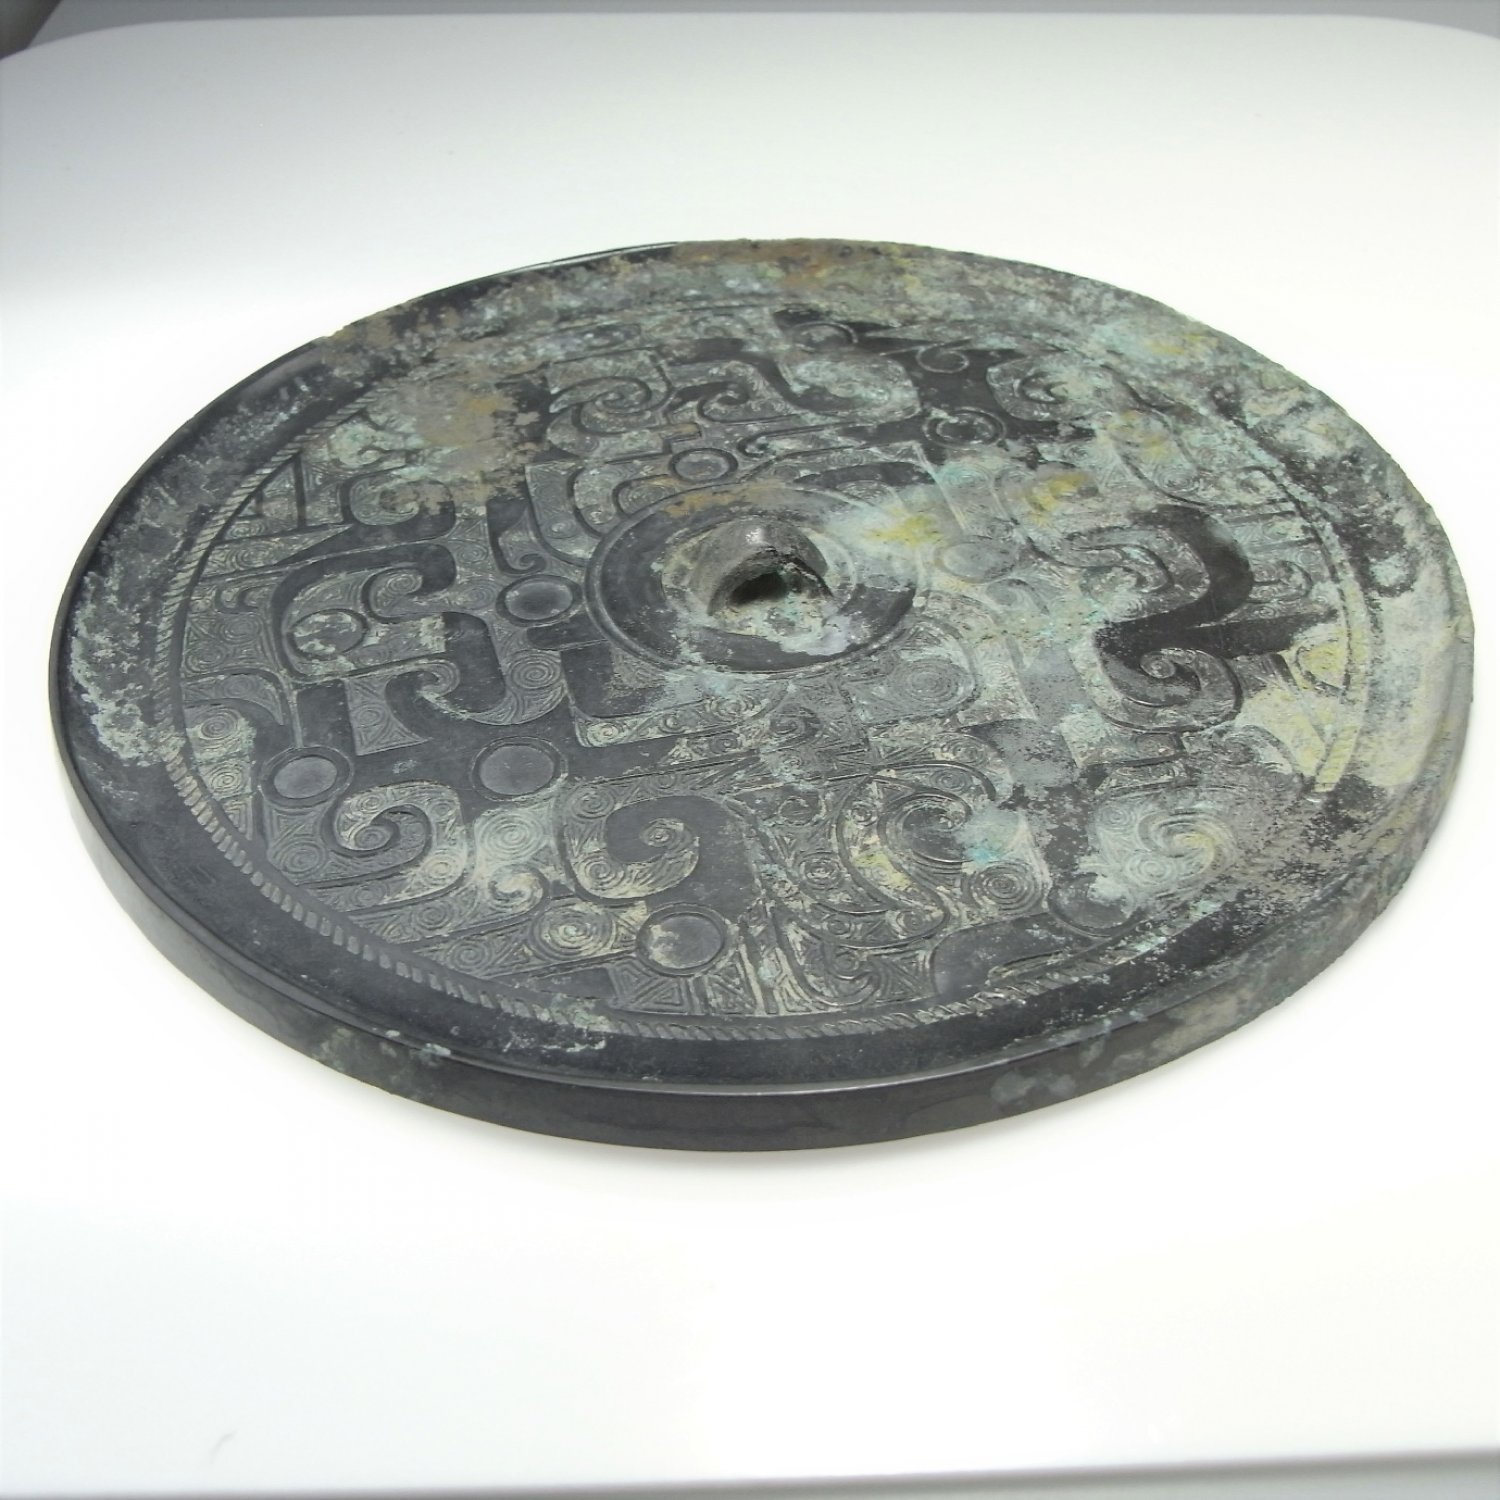 ANCIENT Warring States Bronze Mirror Chinese Art and Artifacts 